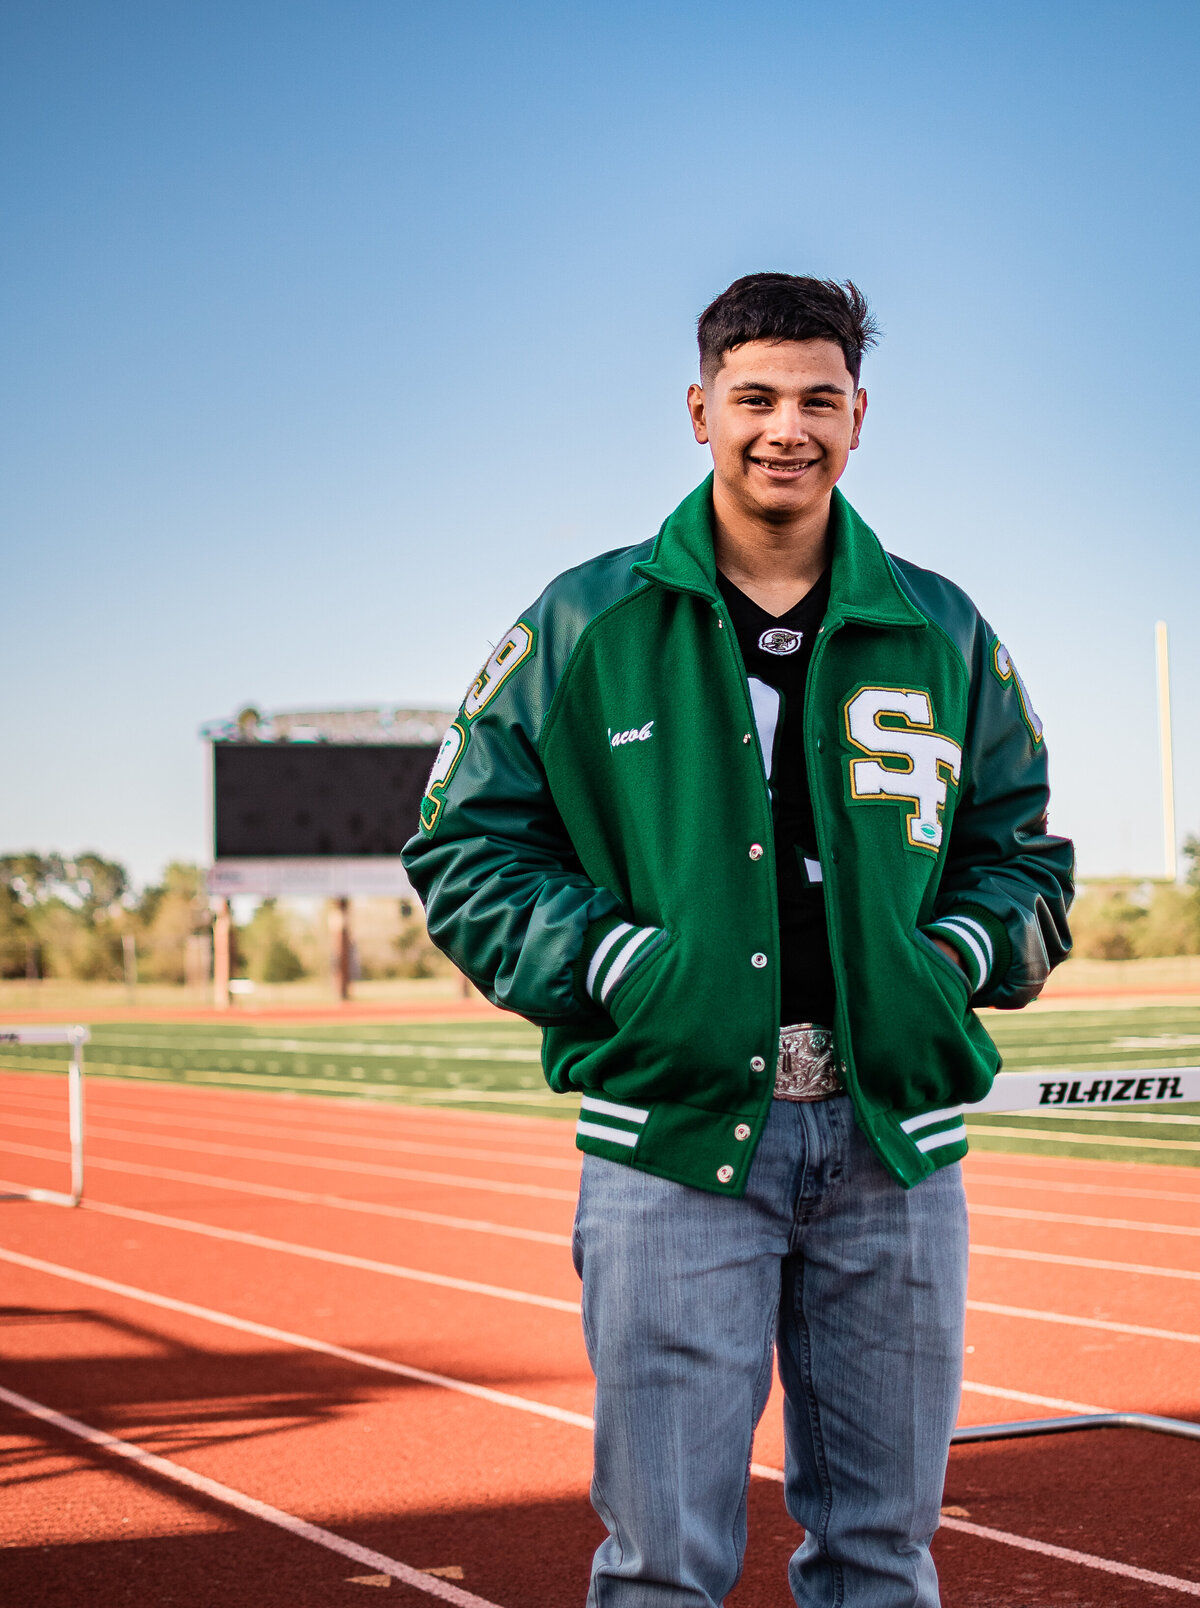 A Houston area senior wears his letterman on the track at his school.